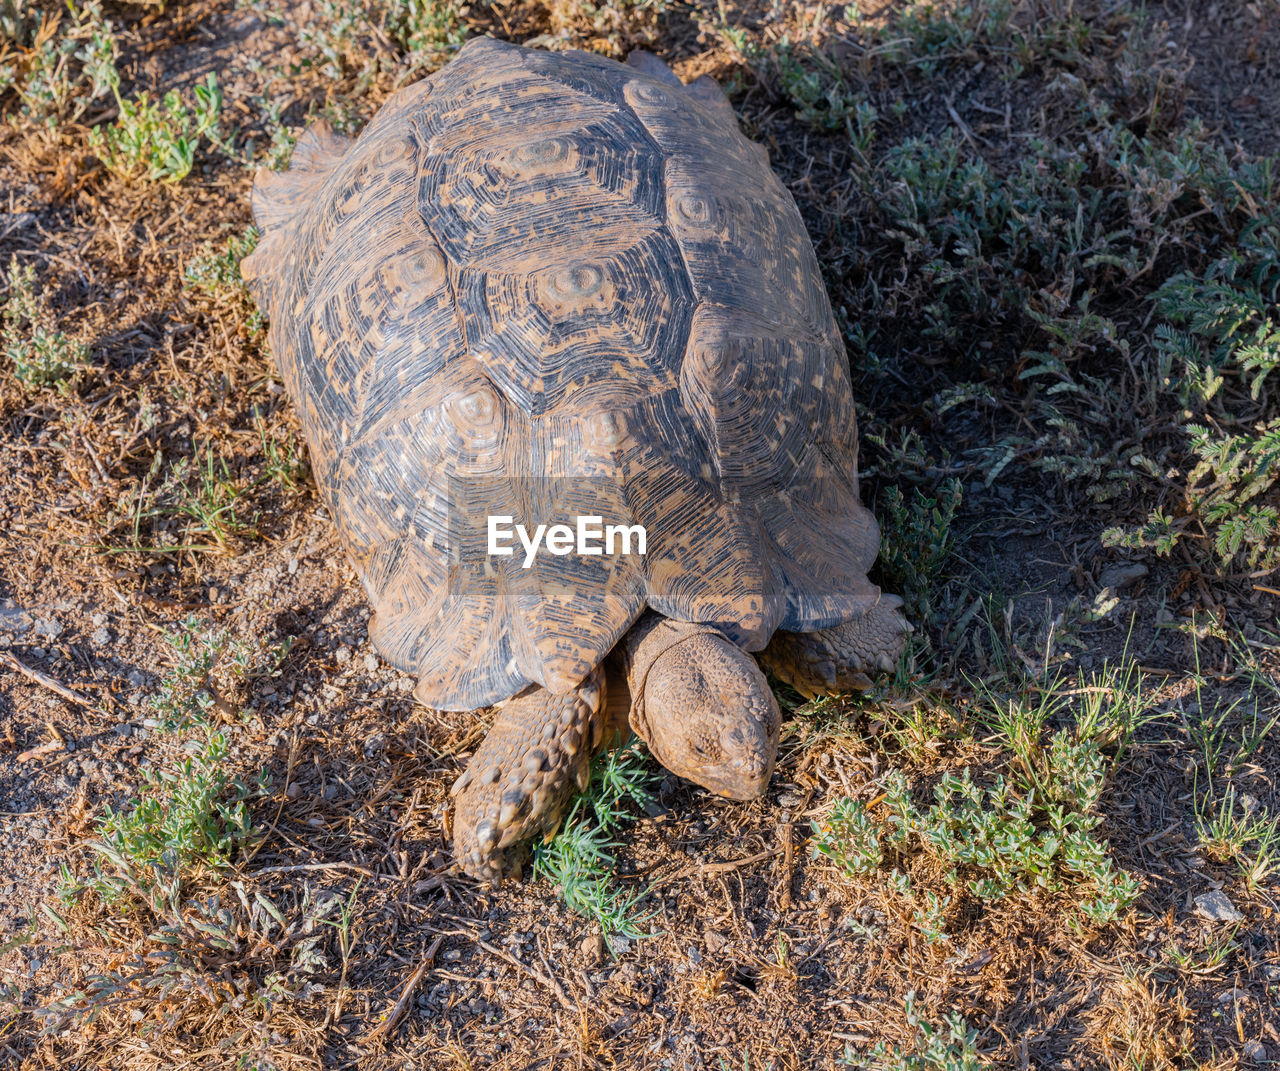 turtle, tortoise, reptile, animal themes, animal, animal wildlife, wildlife, shell, animal shell, nature, one animal, tortoise shell, land, no people, plant, high angle view, day, outdoors, grass, field, sea turtle